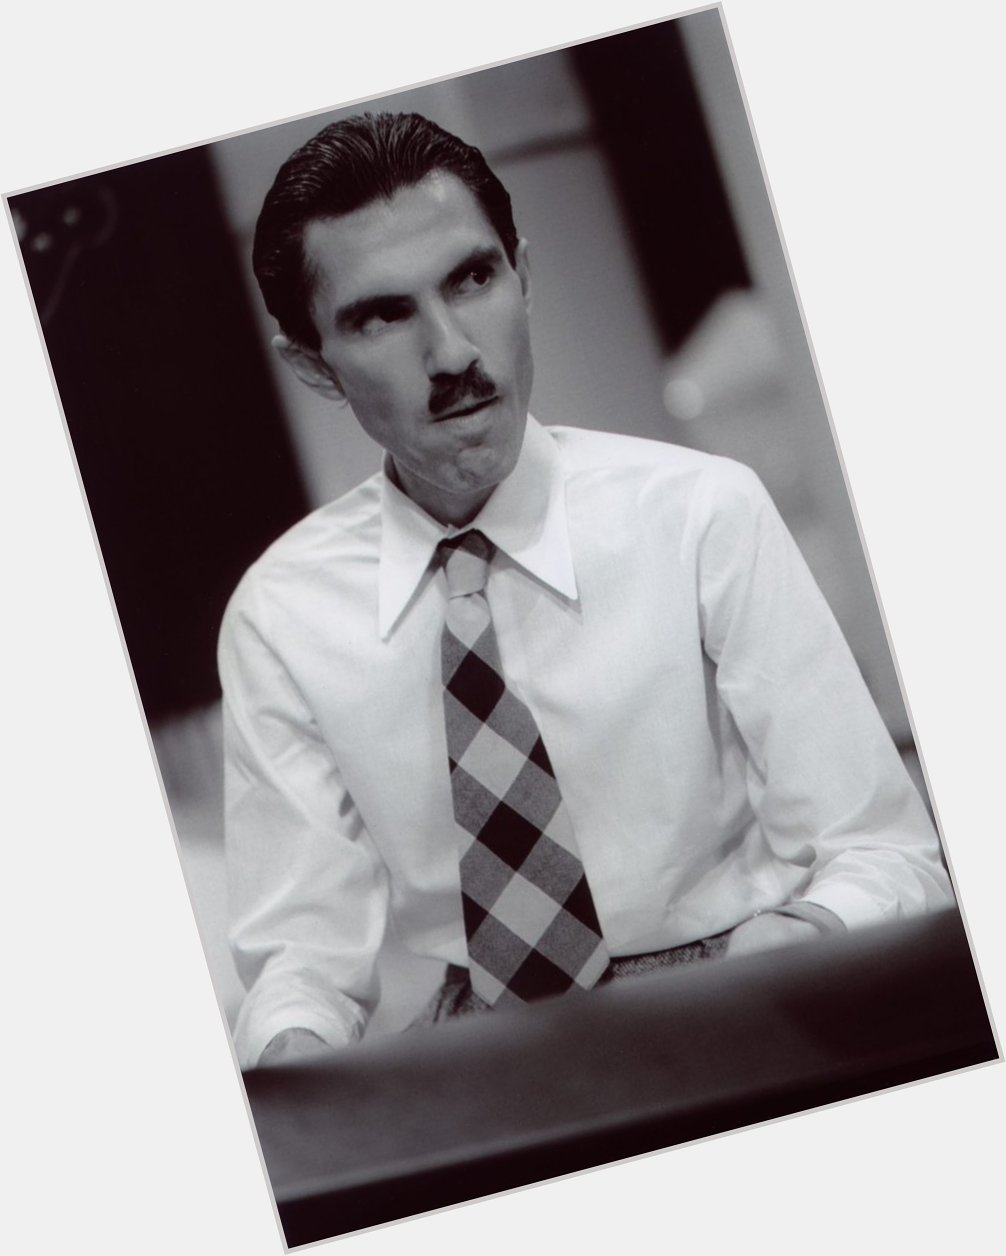 Happy Birthday  Ron Mael of Sparks!  